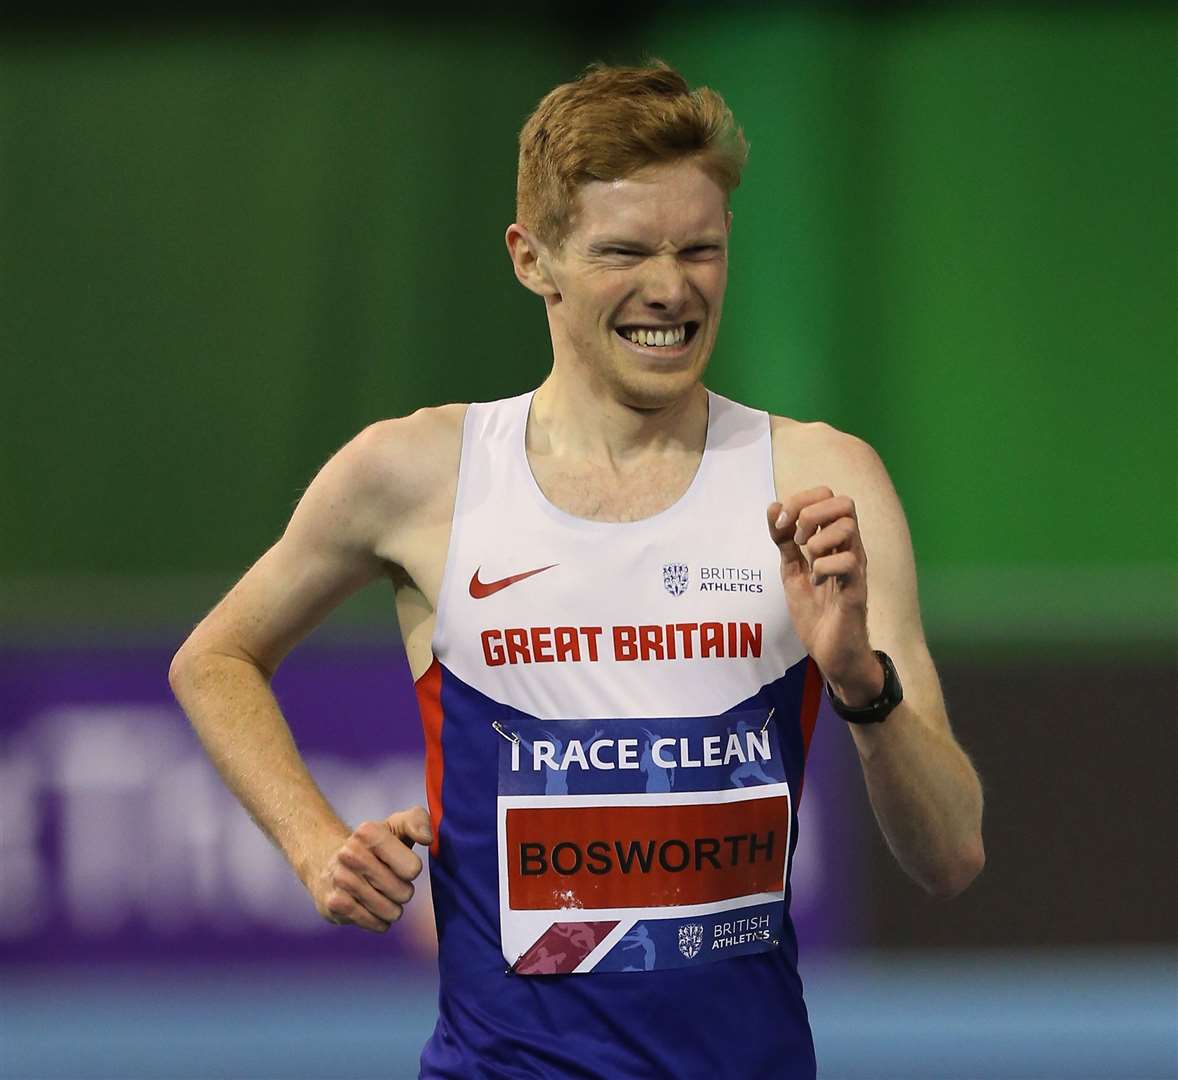 Tonbridge AC's Tom Bosworth is confident the Olympics will take place in Japan as scheduled Picture: Stephen Pond/British Athletics